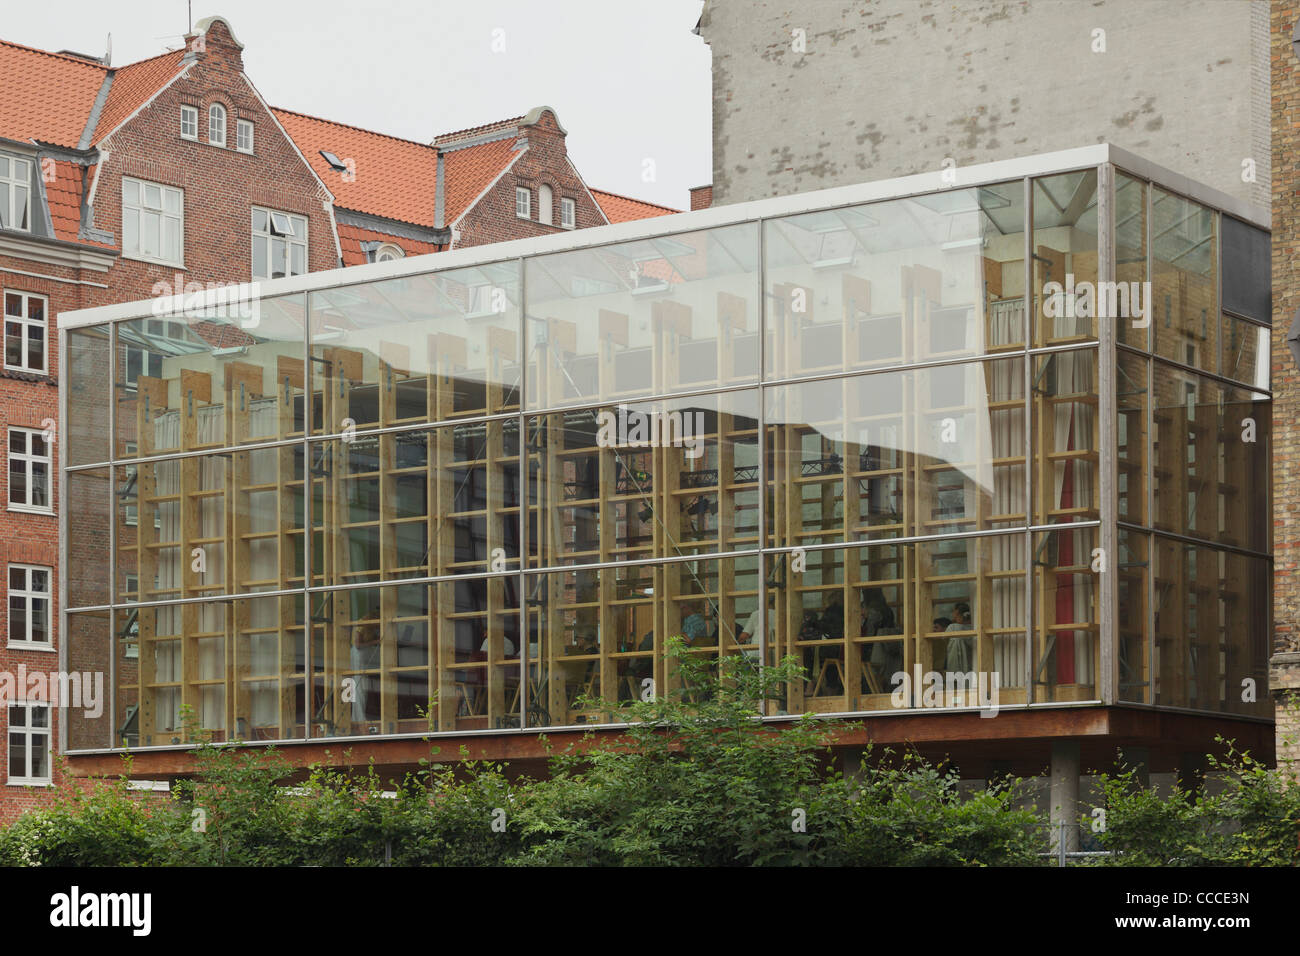 Holmbladsgade A Converted 19Th Print Factory With A Contemporary Glass And Wood Extension, Houses A Stock Photo Alamy